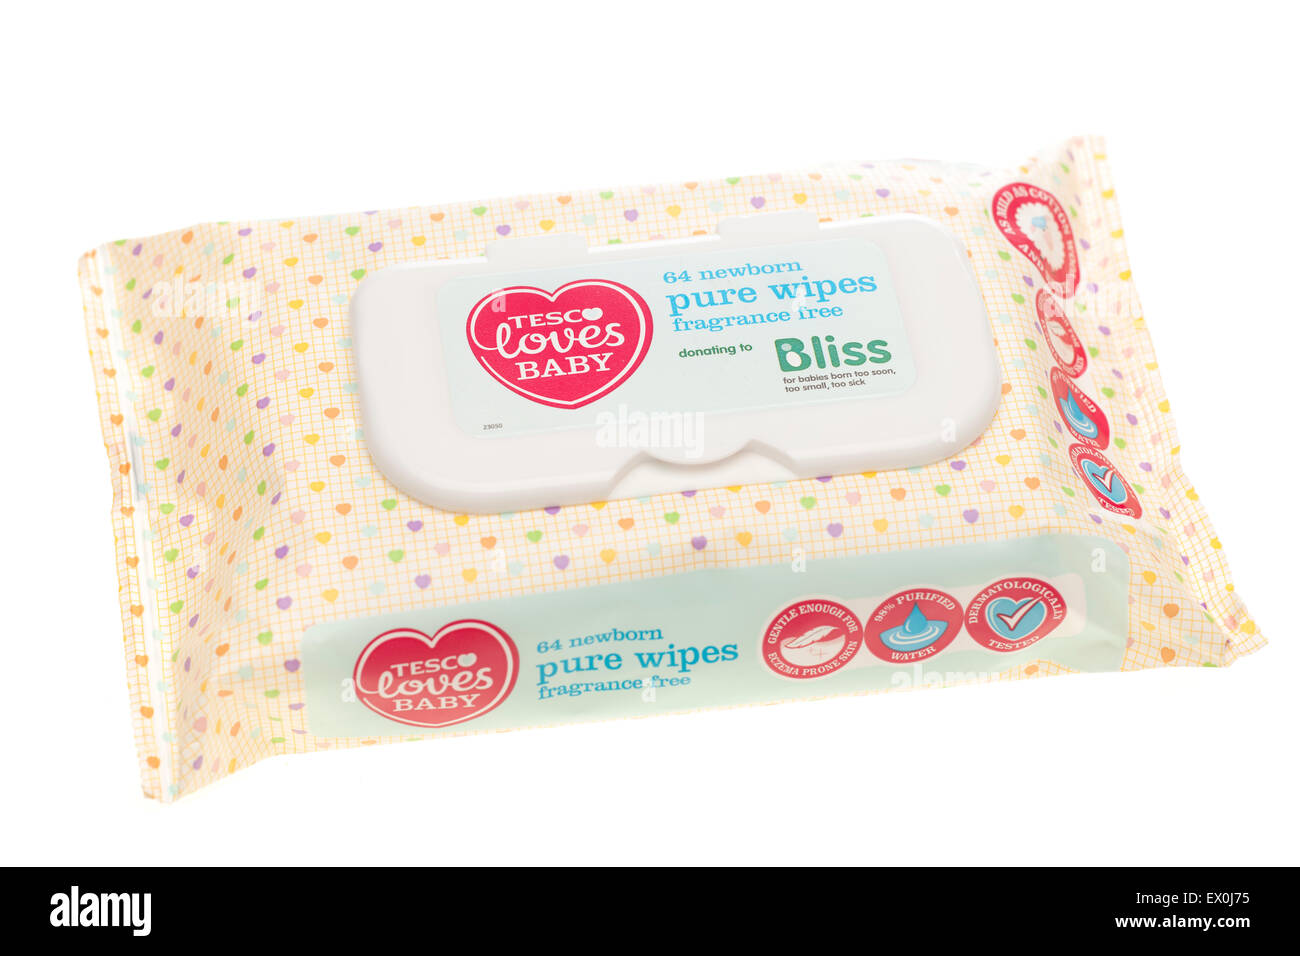 Pack of Tesco fragrance free baby pure wipes      donating to Bliss Stock Photo